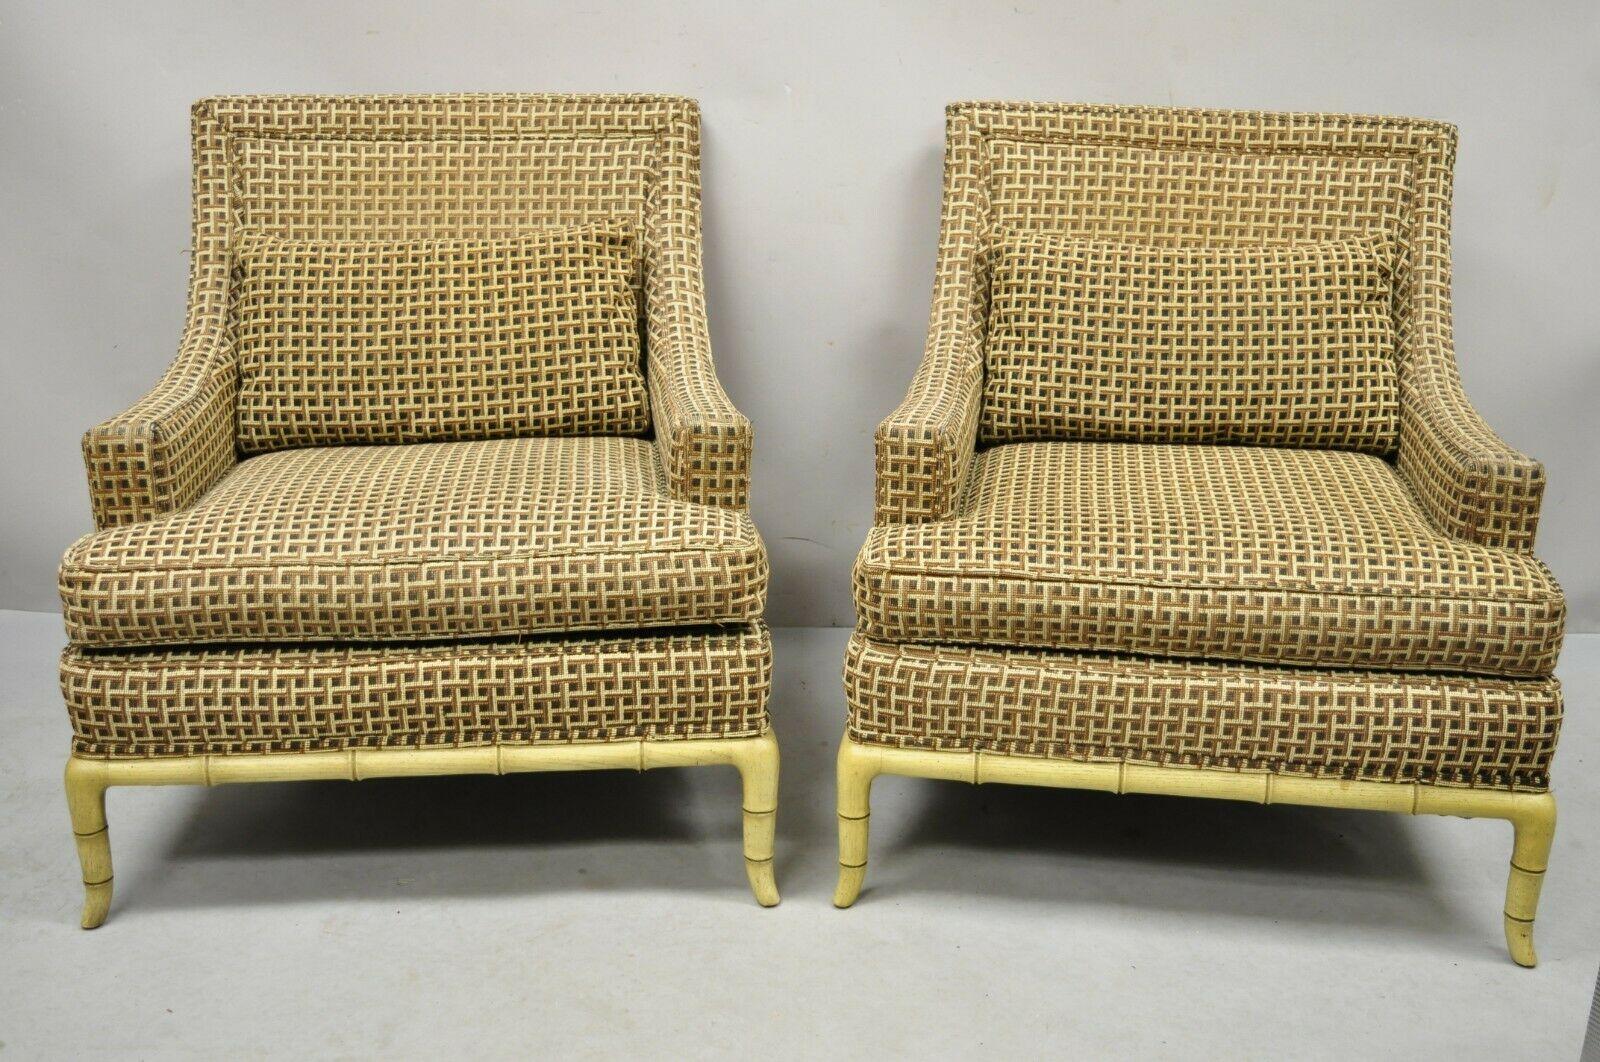 Marge Carson Vintage Faux Bamboo Hollywood Regency Lounge Club Chairs - a Pair. Item features shapely carved wood faux bamboo legs and base, sculptural sloping arms, very comfortable forms, solid wood frames, original label, quality American